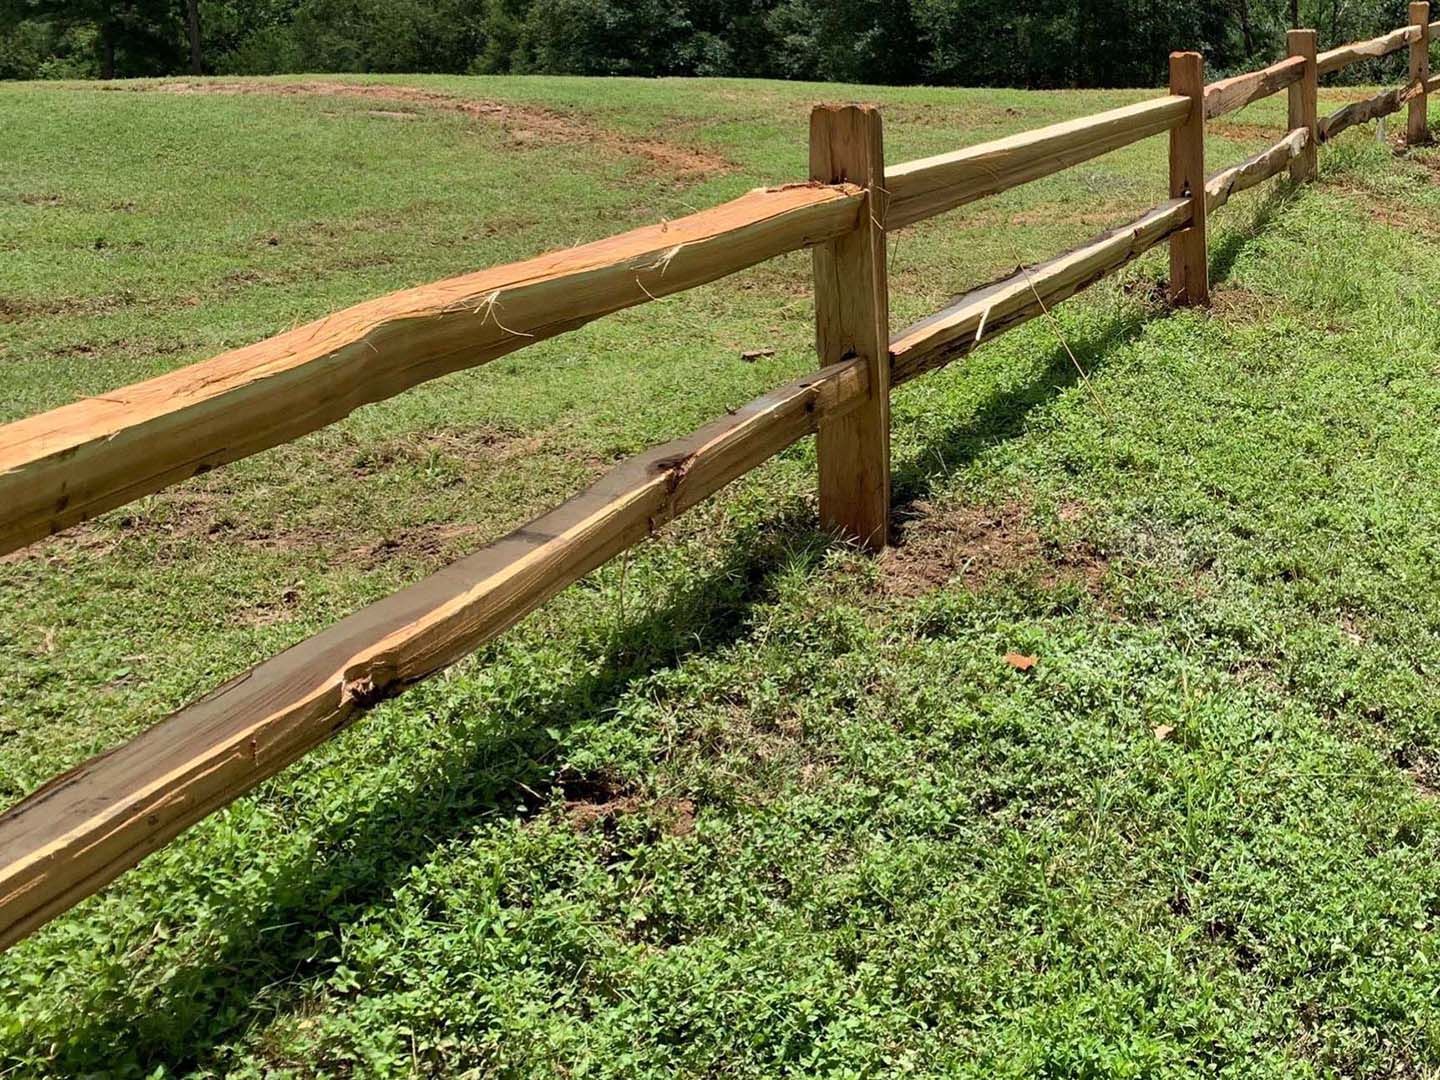 Elgin Texas residential and commercial fencing